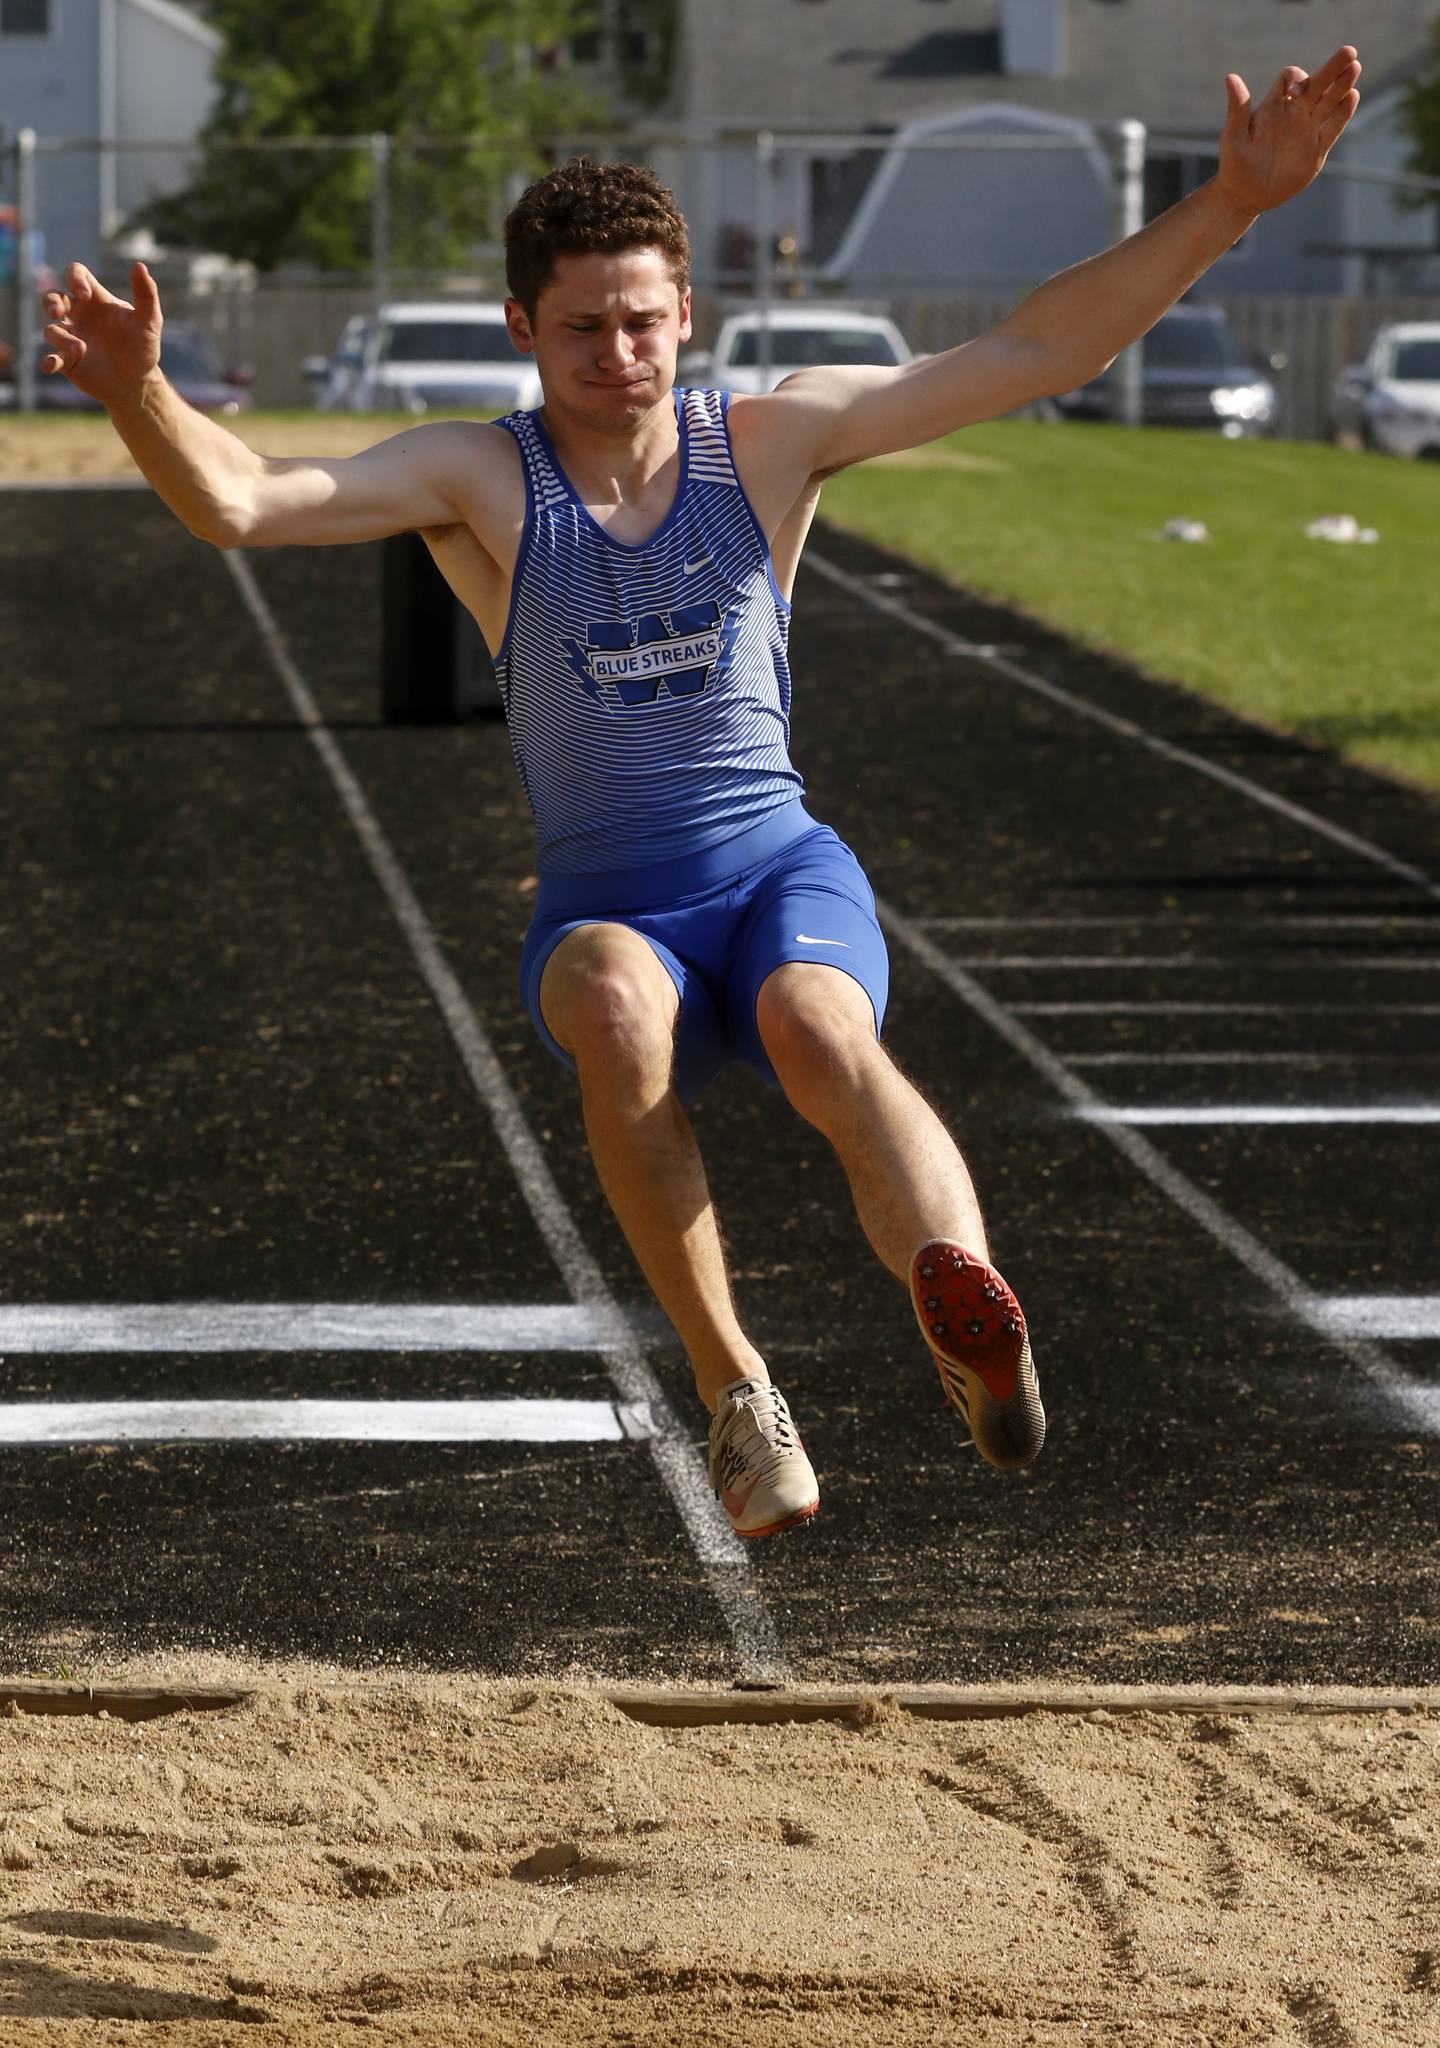 Woodstock’s Tim Maidment competes in the long jump during the IHSA Class 2A Belvidere Boys Track and Field Sectional Thursday, May 19, 2022, at Belvidere High School.